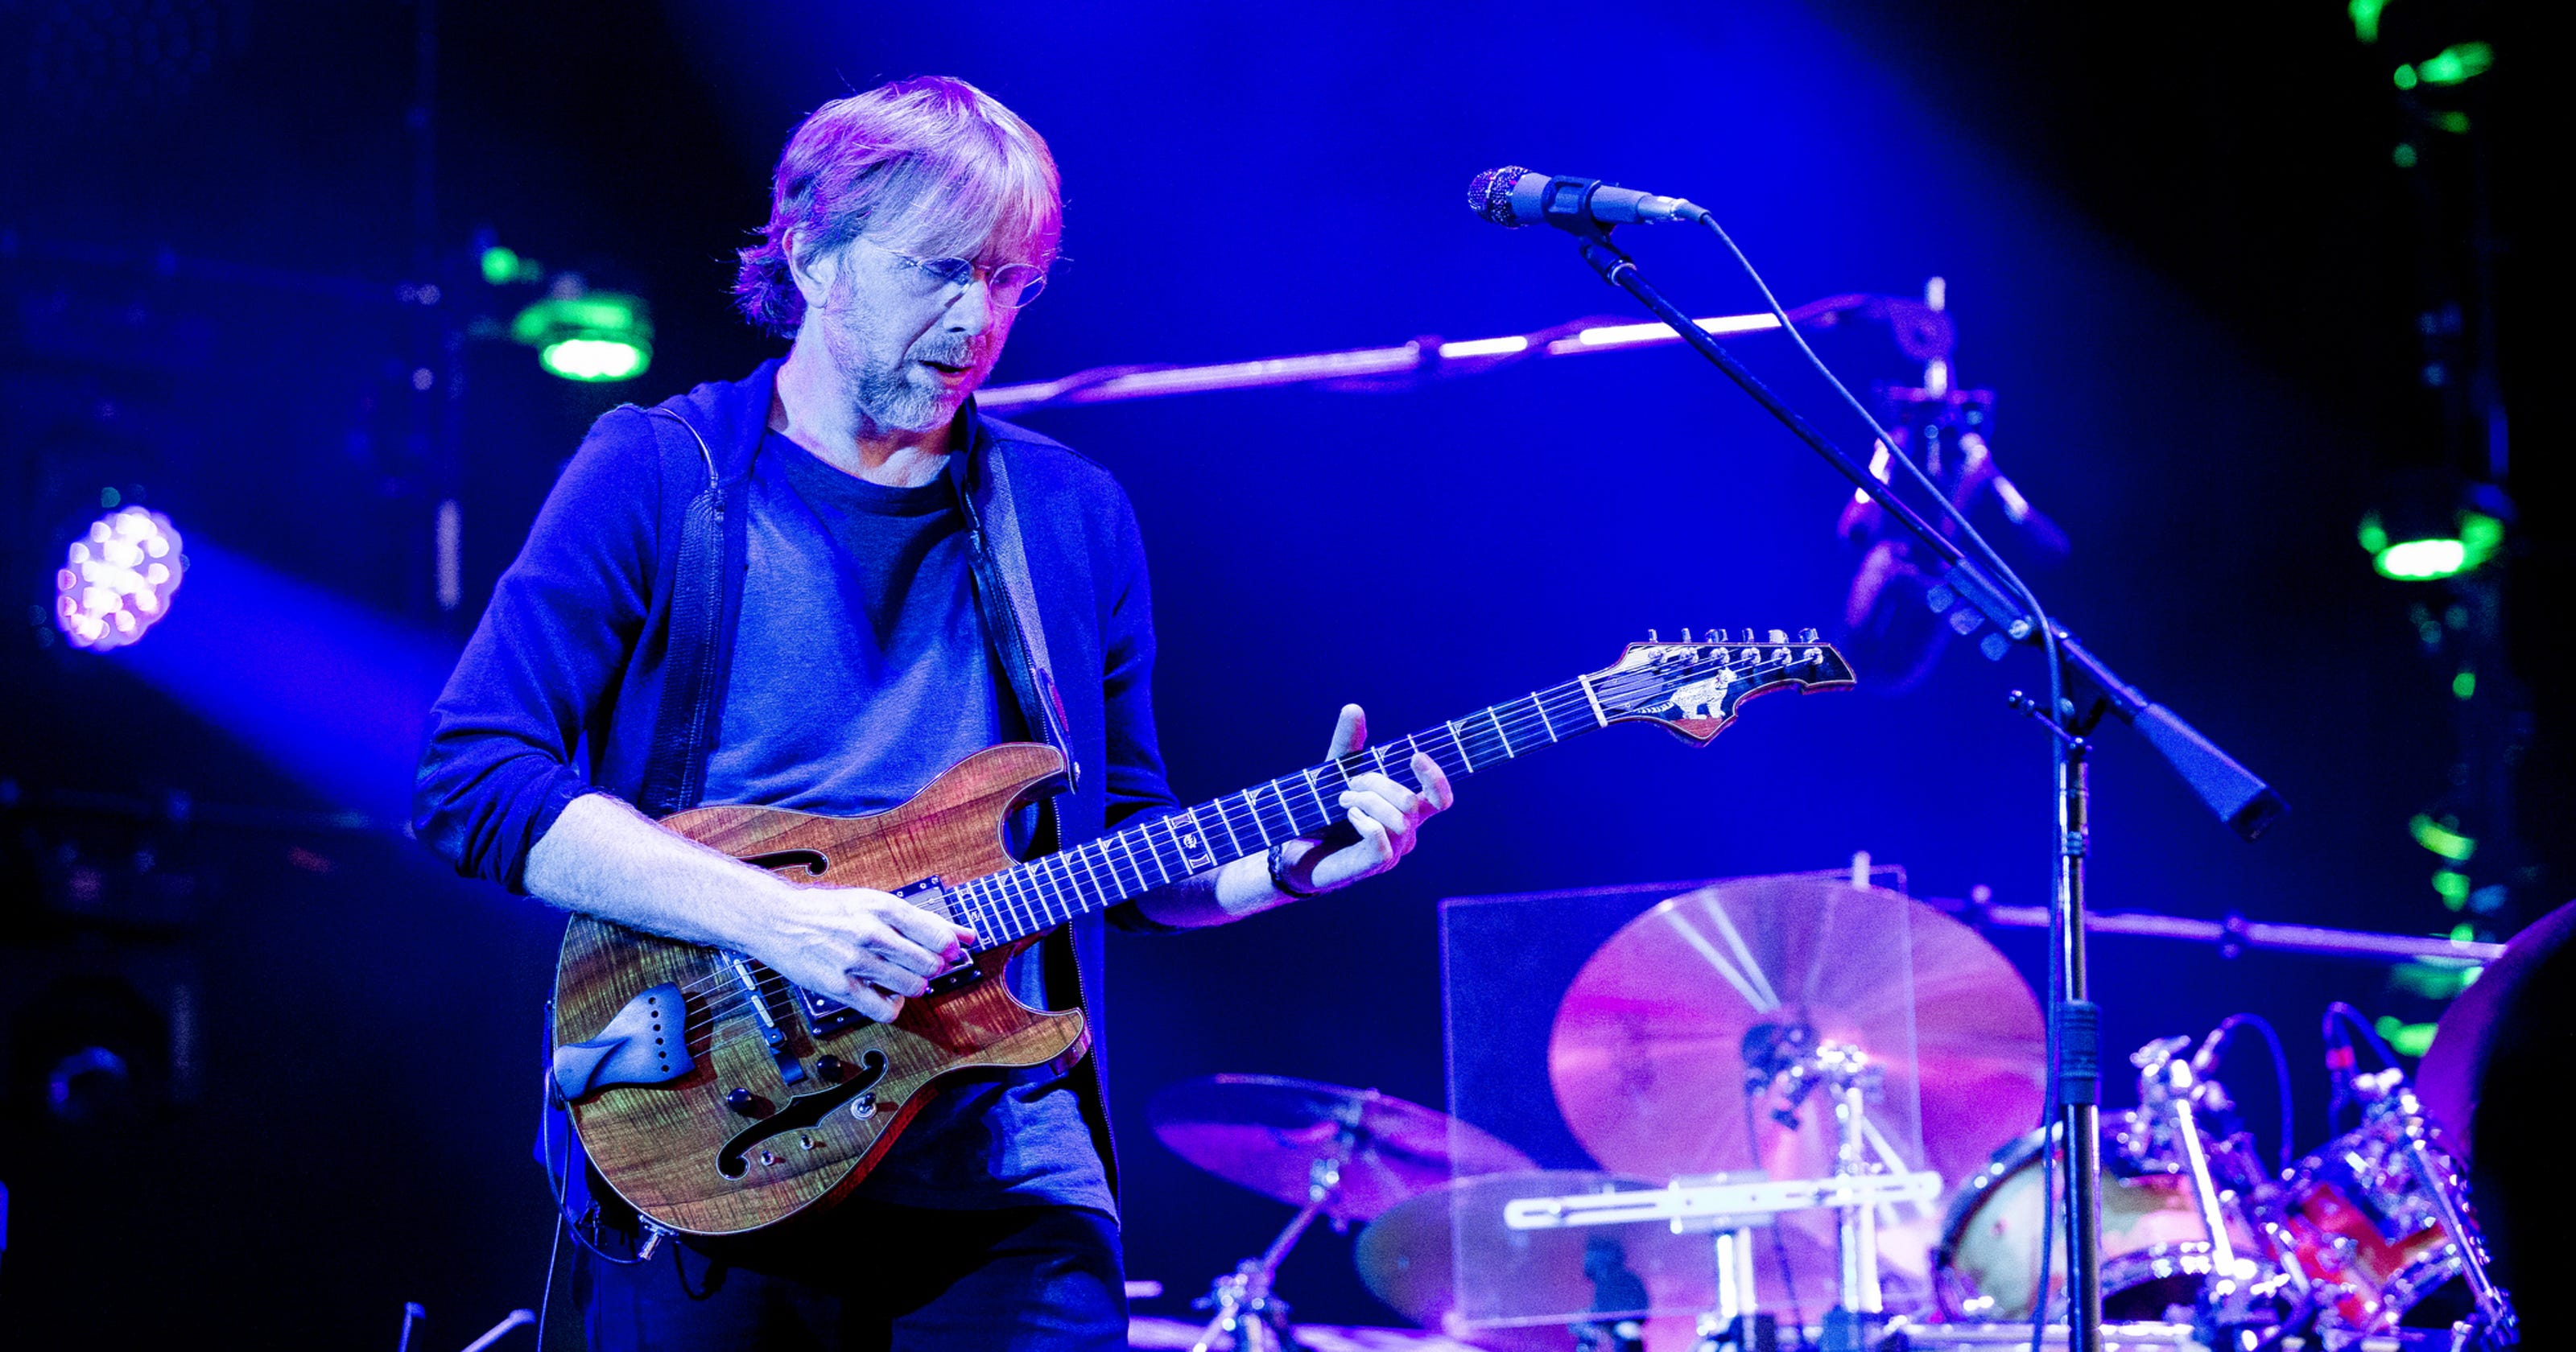 Phish festival in New York canceled after severe weather